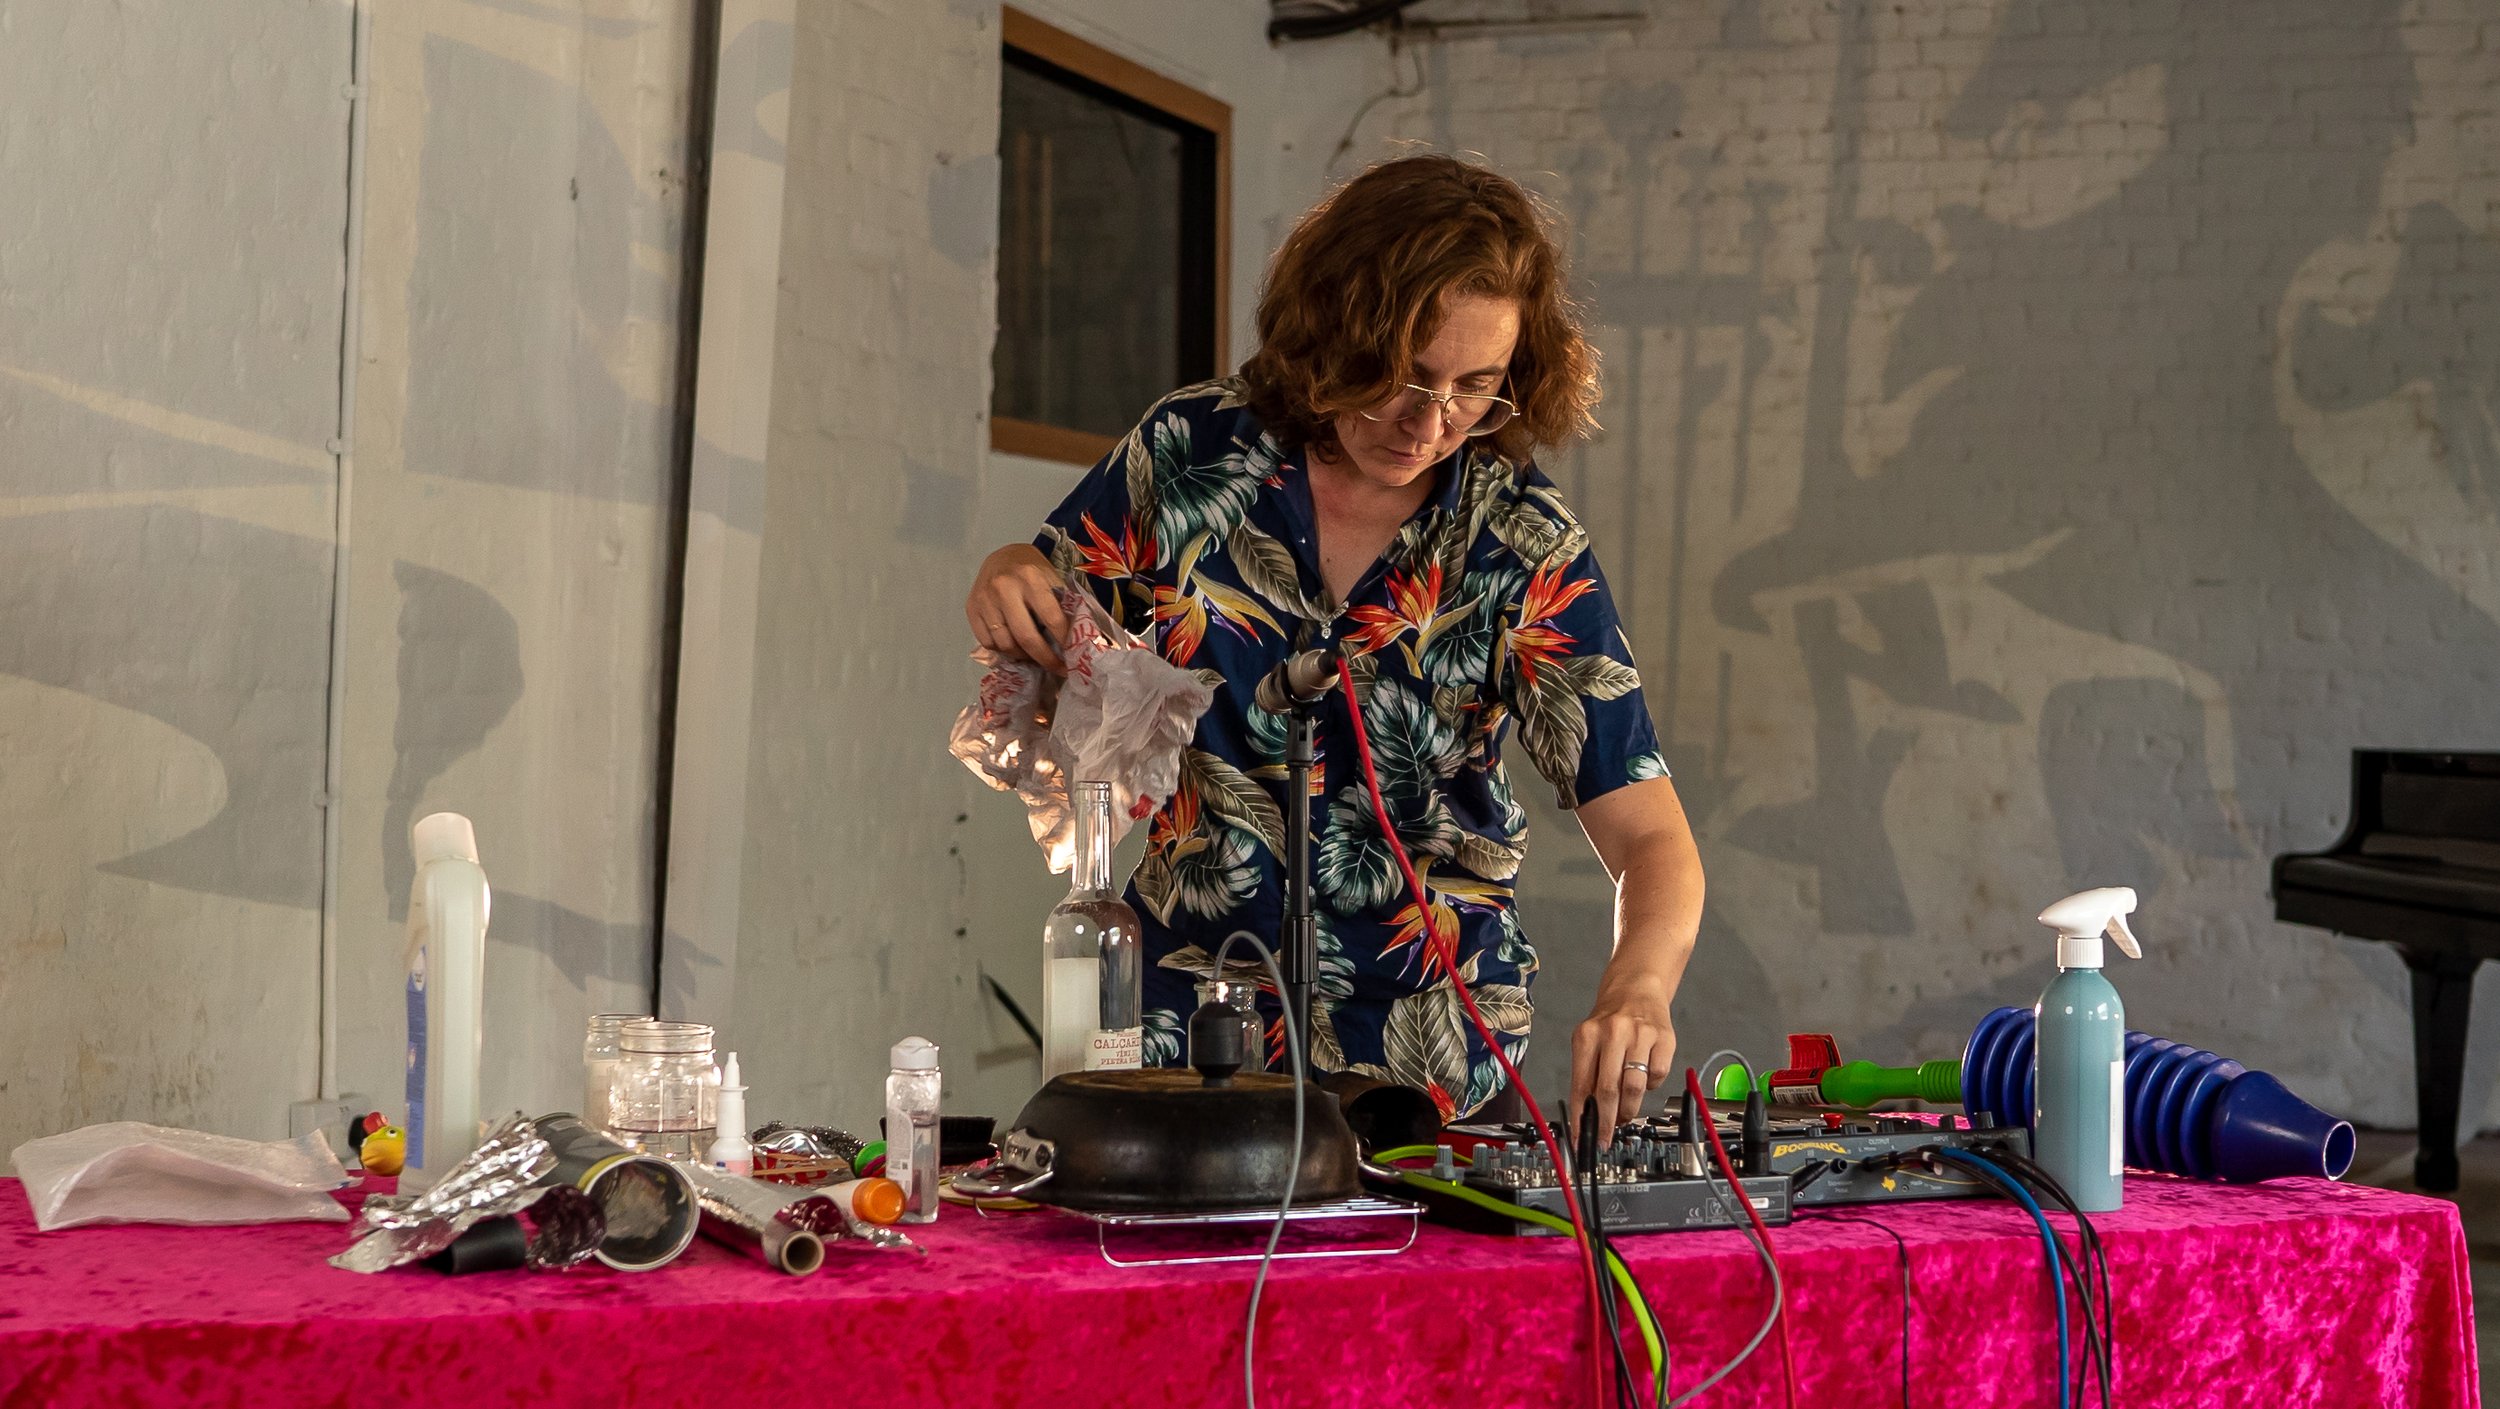 Kate Carr performing 'rubbish music' - at a table with electronics and household items